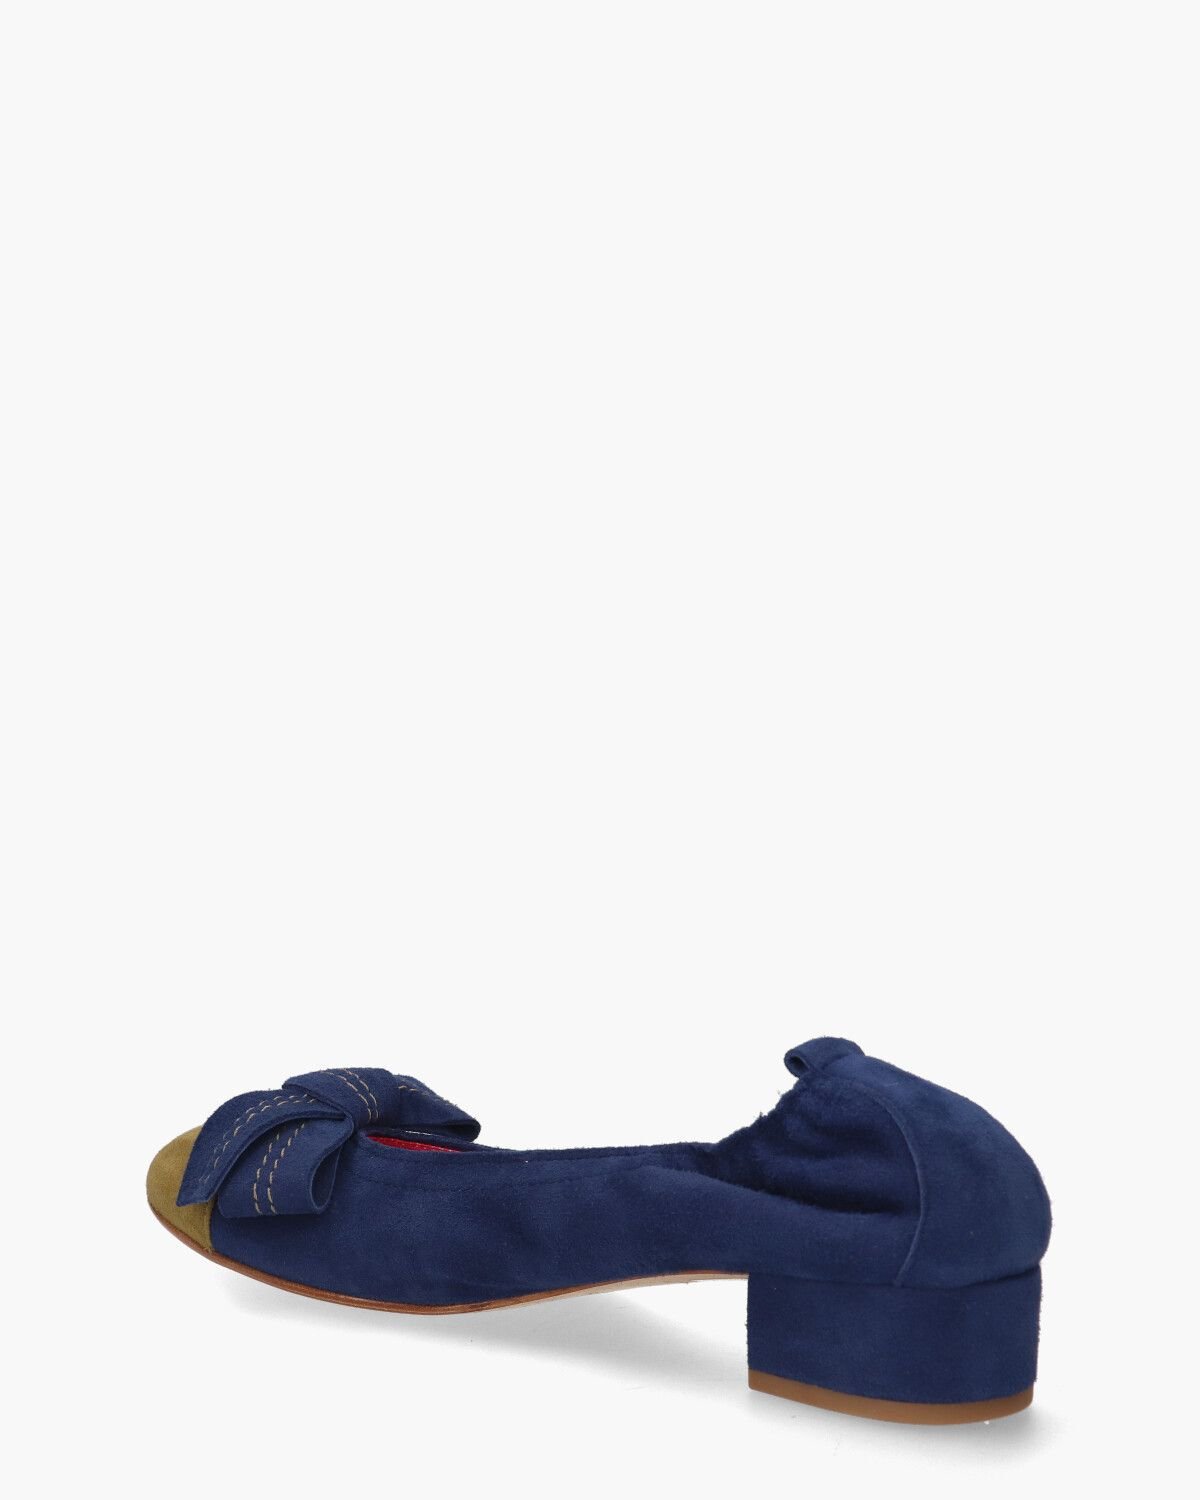 3337 Donkerblauw Damesloafers